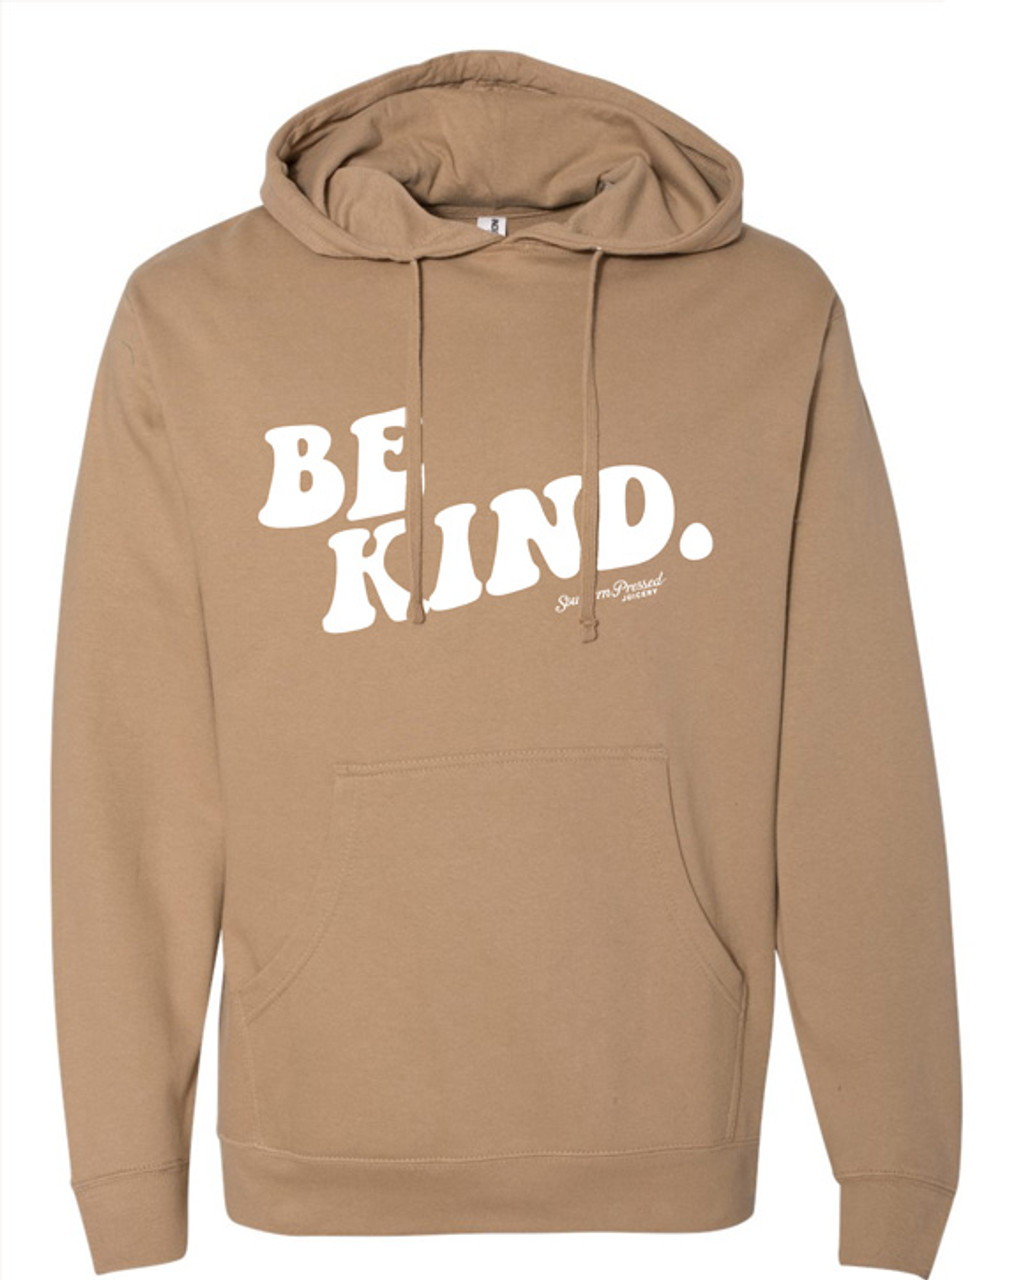 Kind" Sweatshirt - - SOLD OUT - Southern Pressed